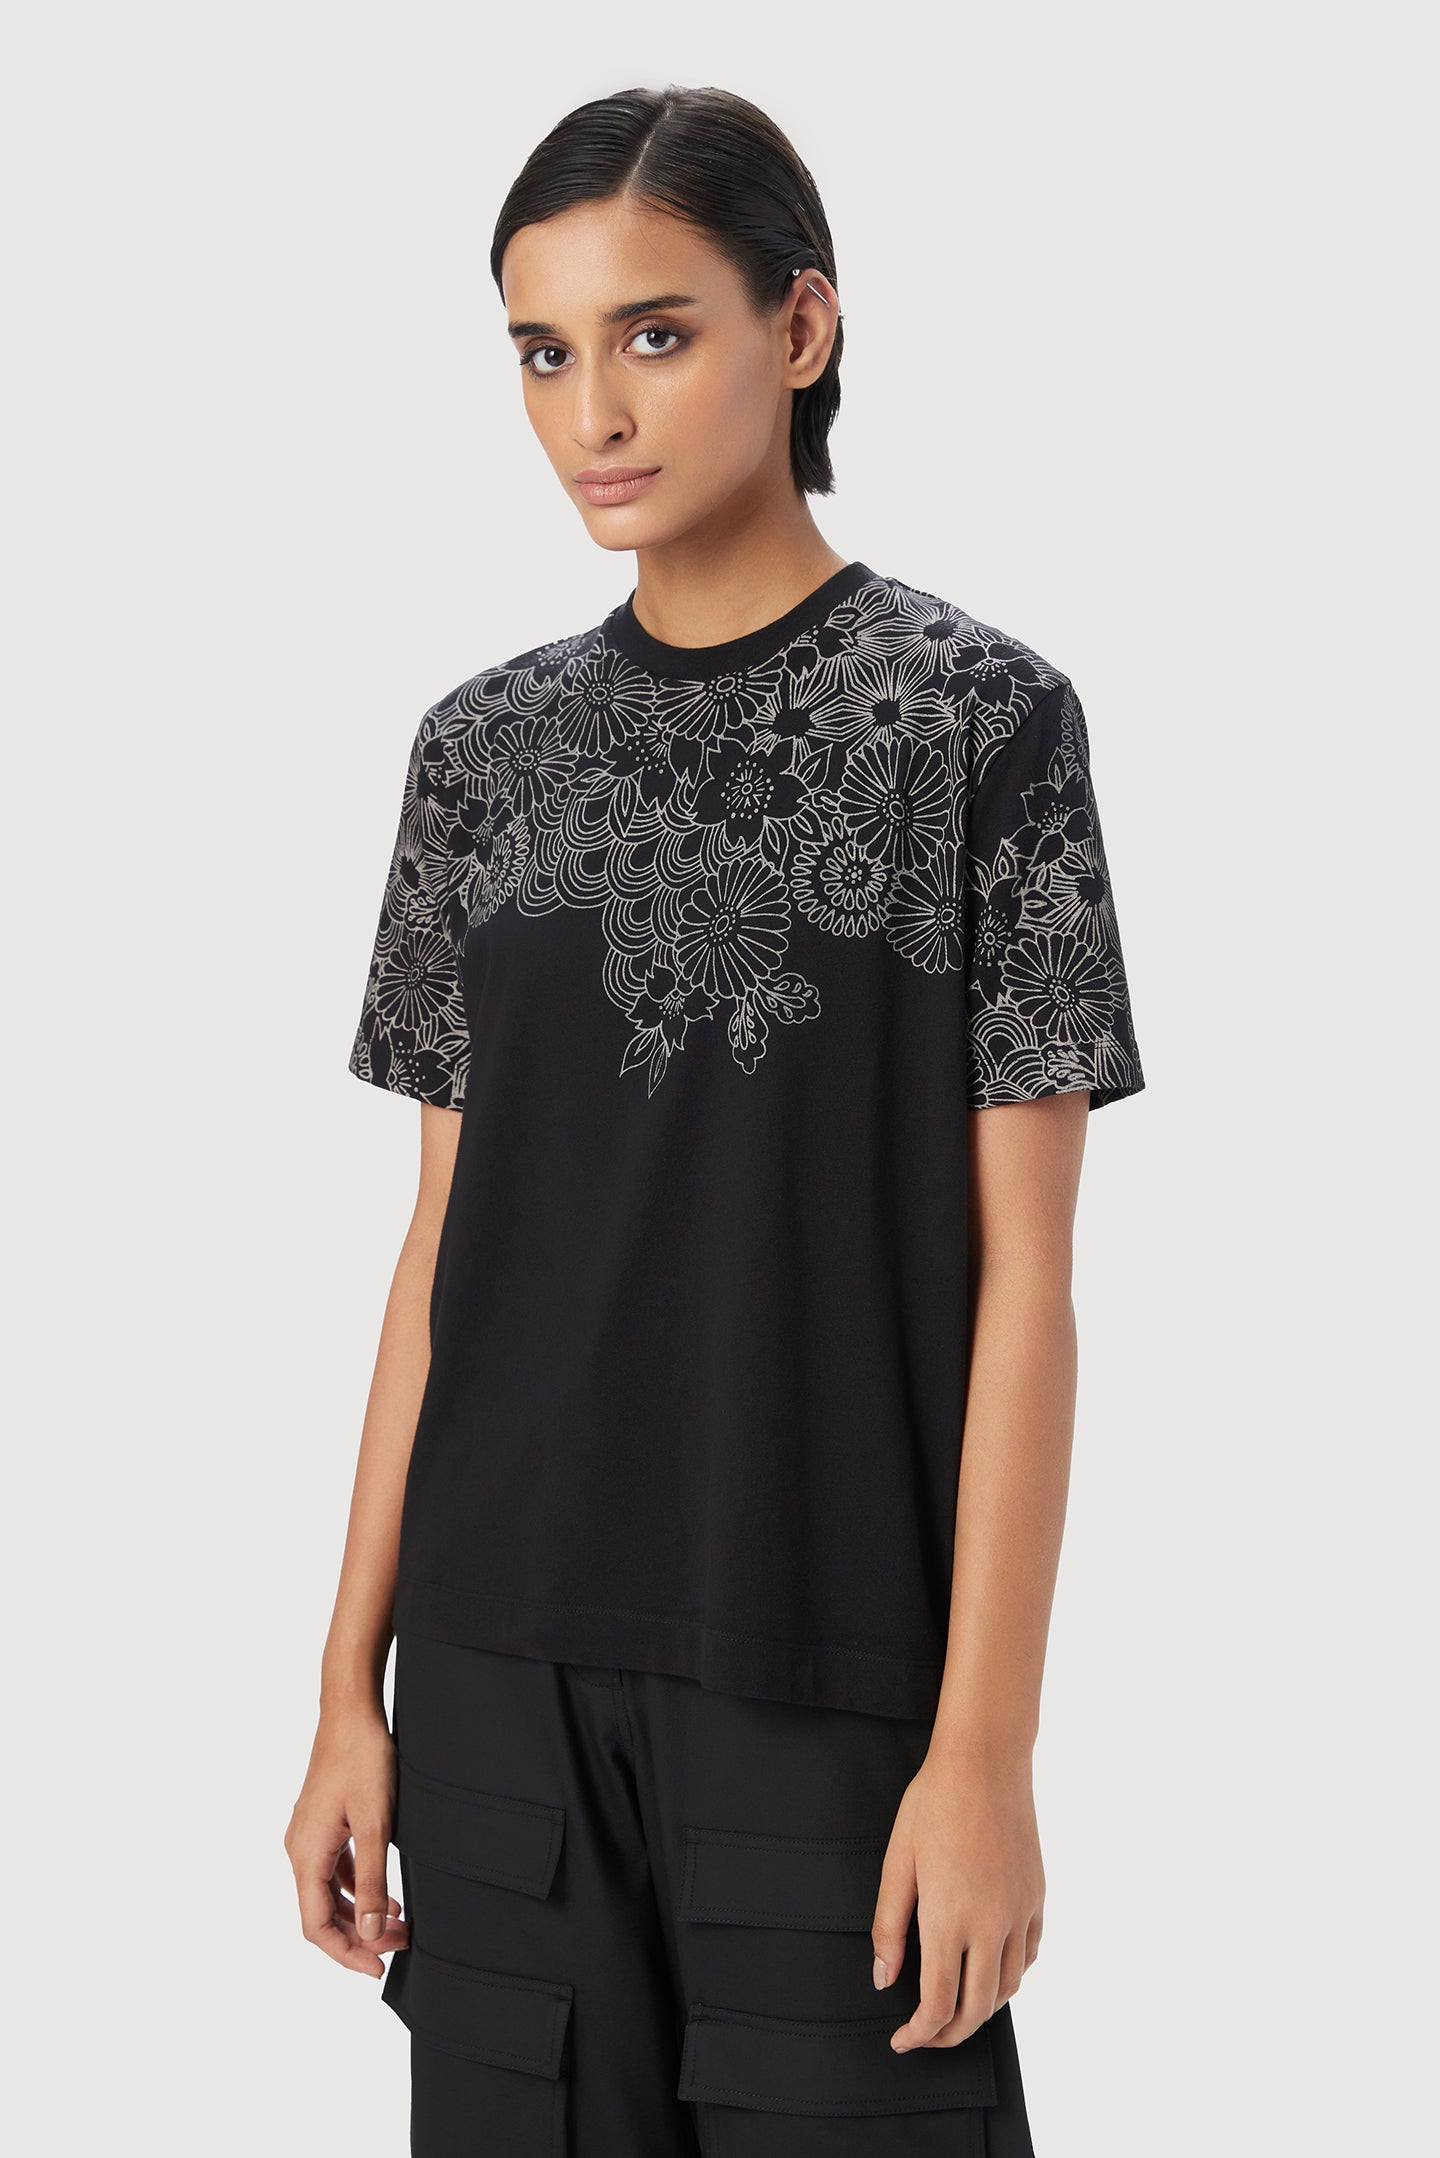 Regular Fit T-Shirt Featuring Floral Print Placement